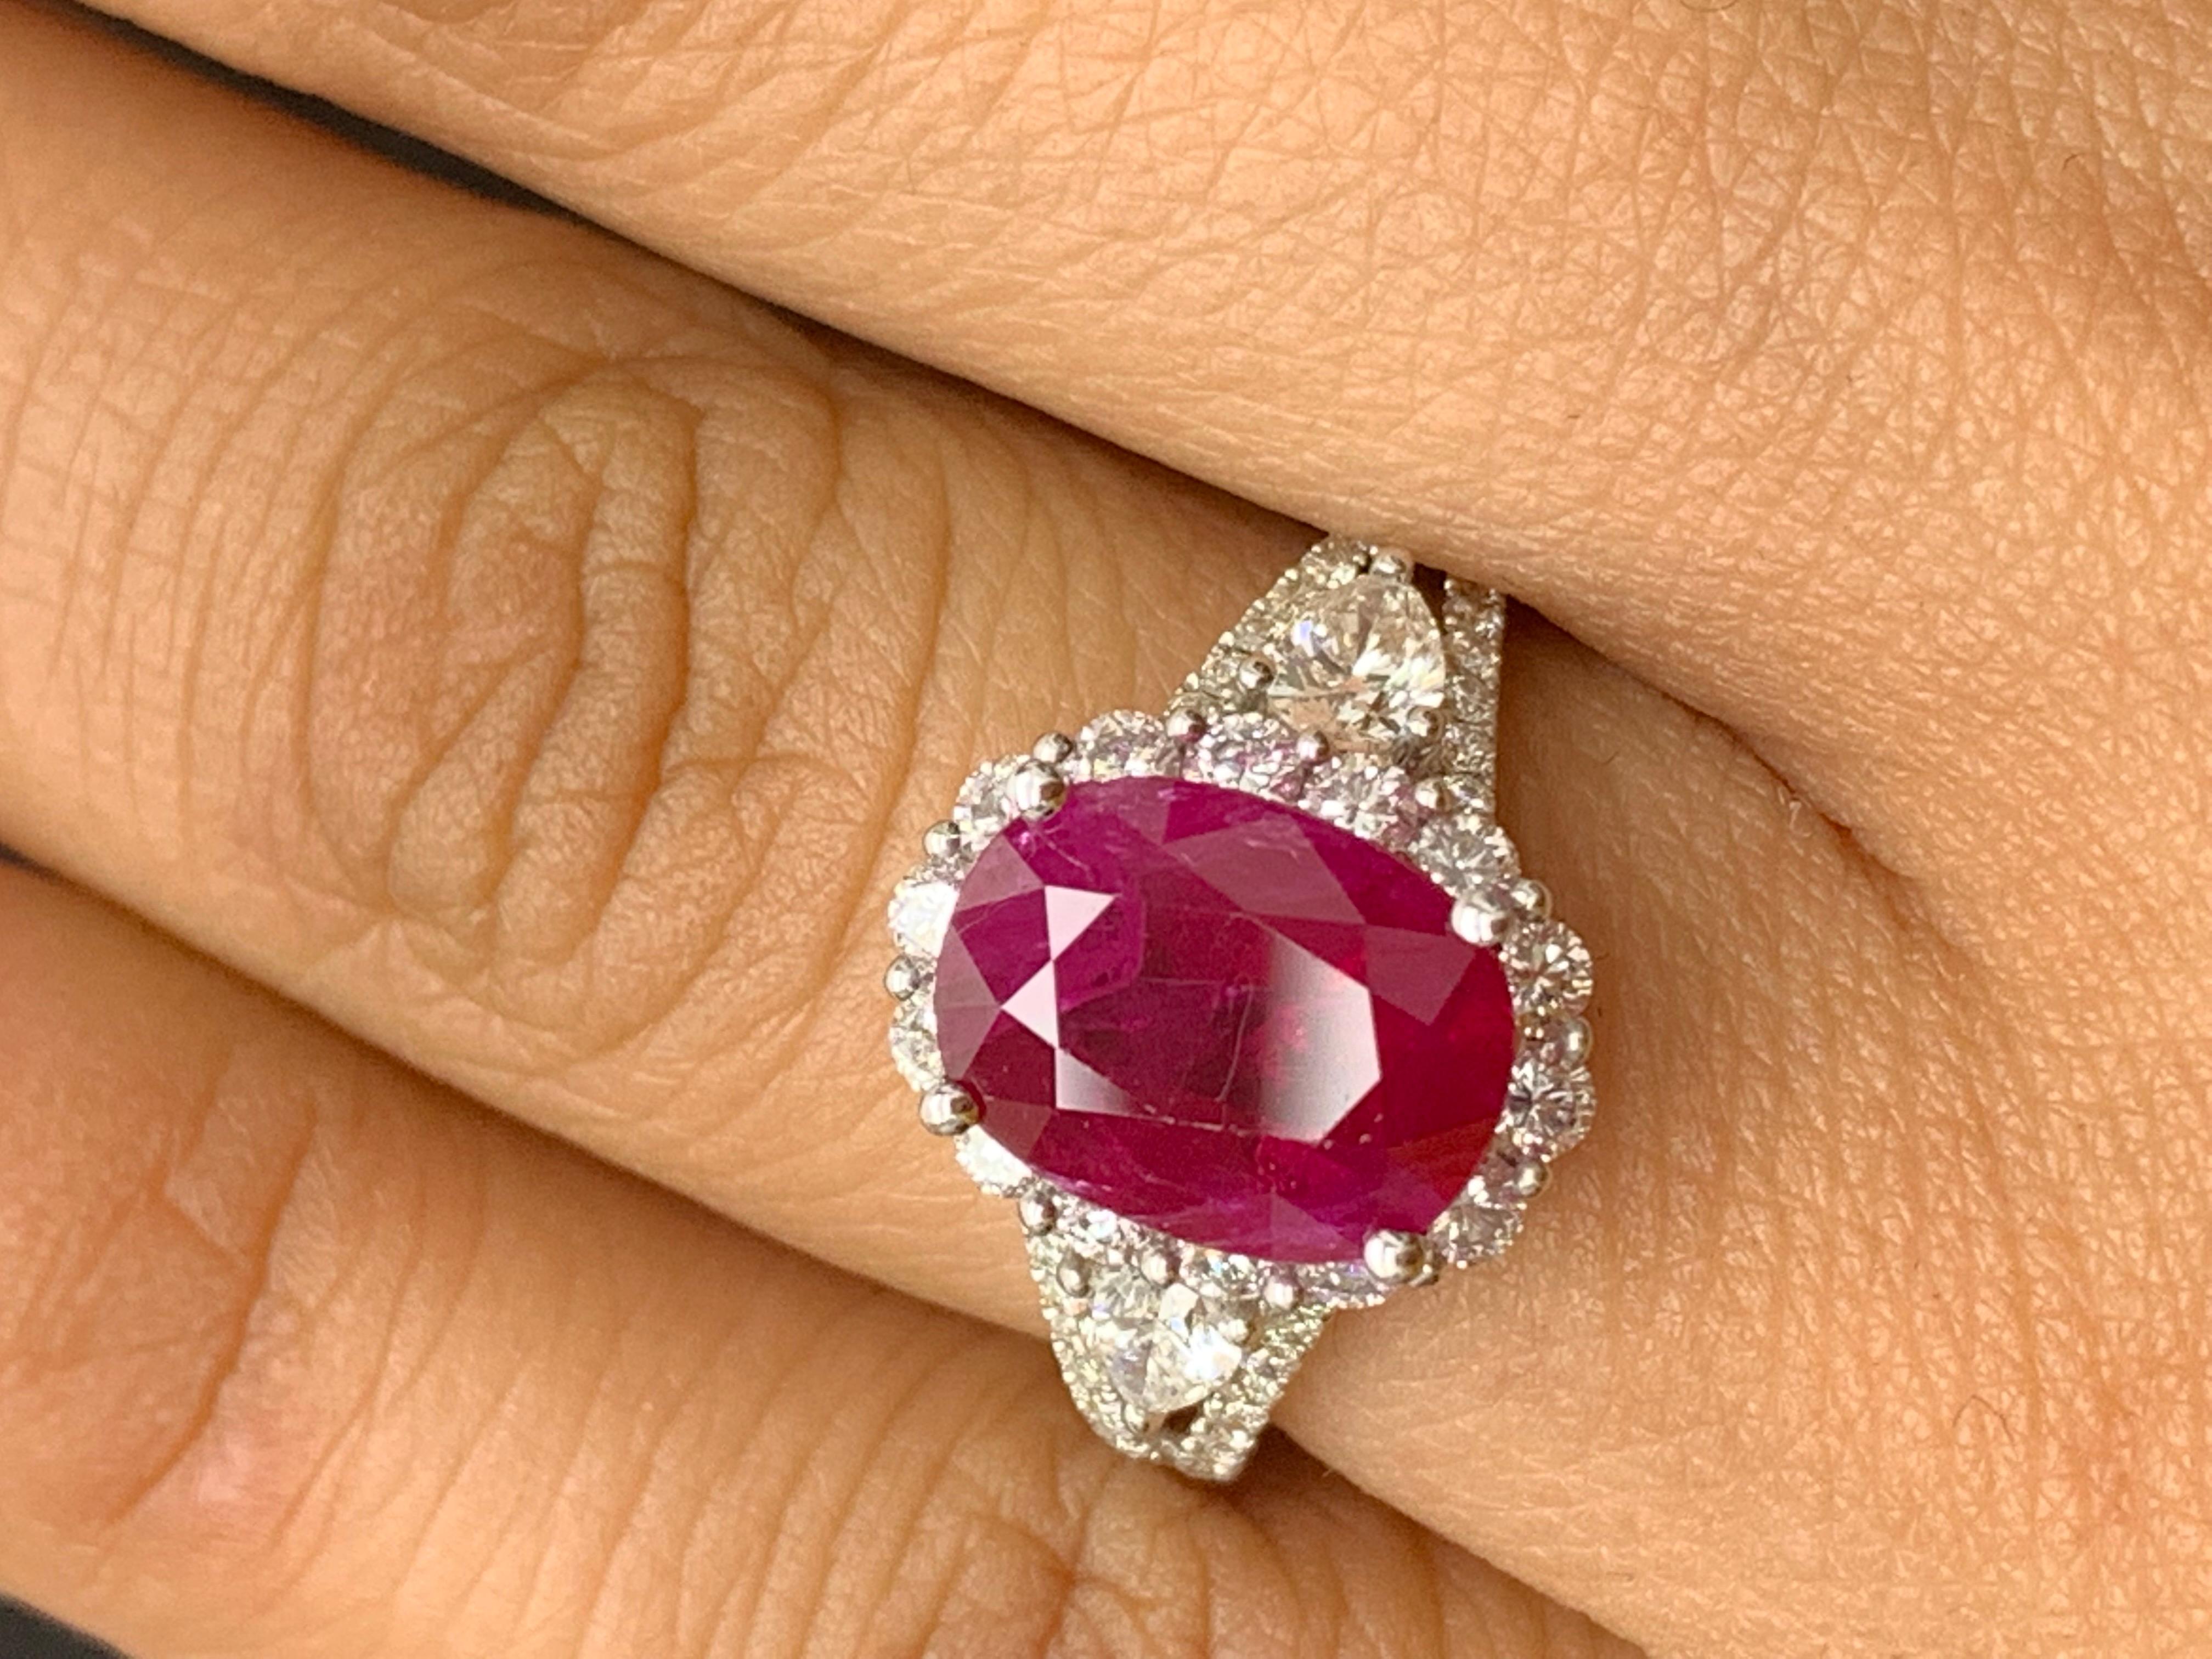 Women's 3.58 Carat Oval Cut Ruby and Diamond Halo Ring in 18K White Gold For Sale